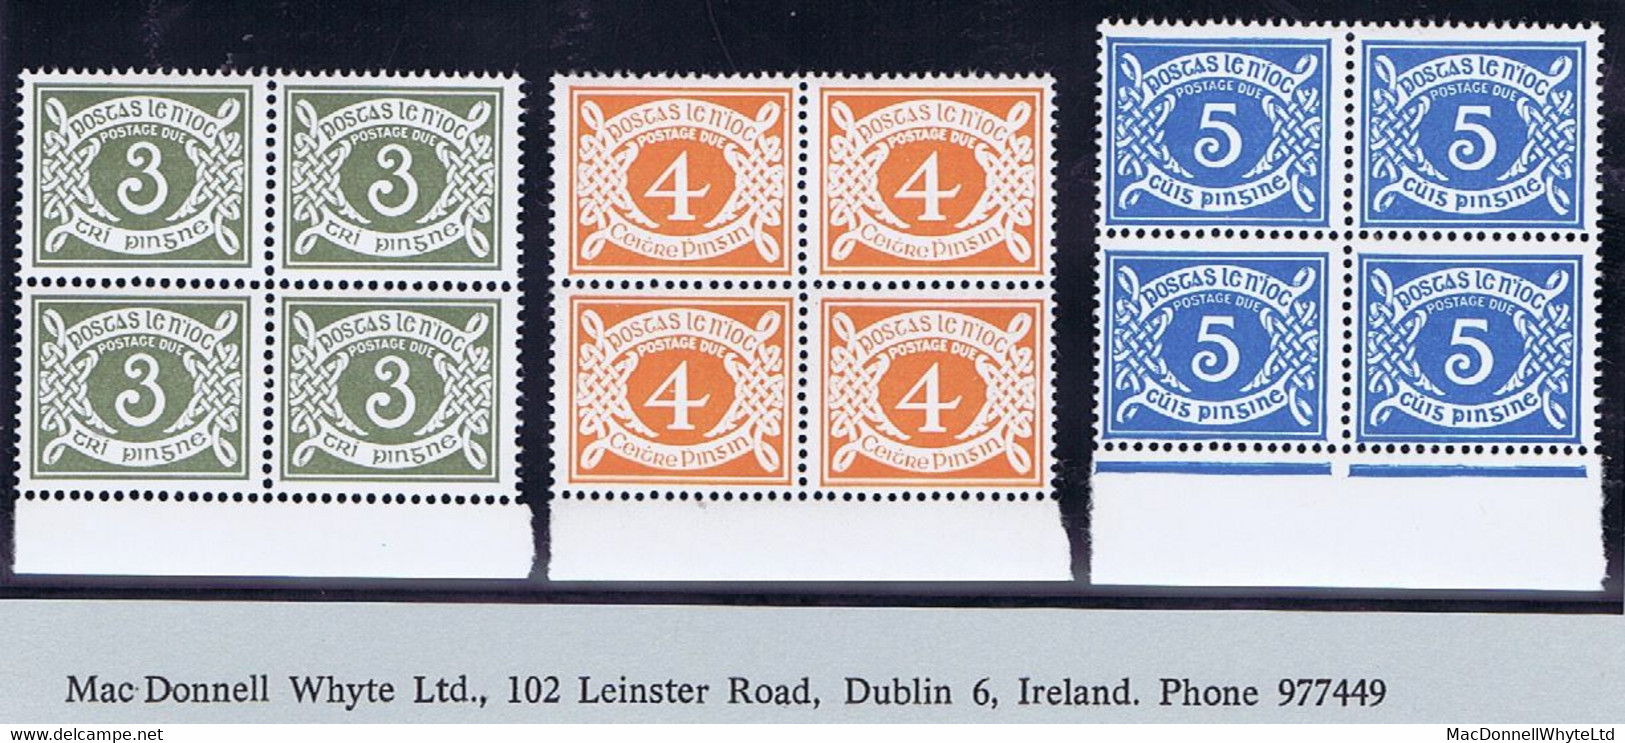 Ireland Postage Due 1978 Unwatermarked 3p 4p 5p Set Of 3, Marginal Blocks Of 4 Mint Unmounted, 4p With Double Bottom - Timbres-taxe